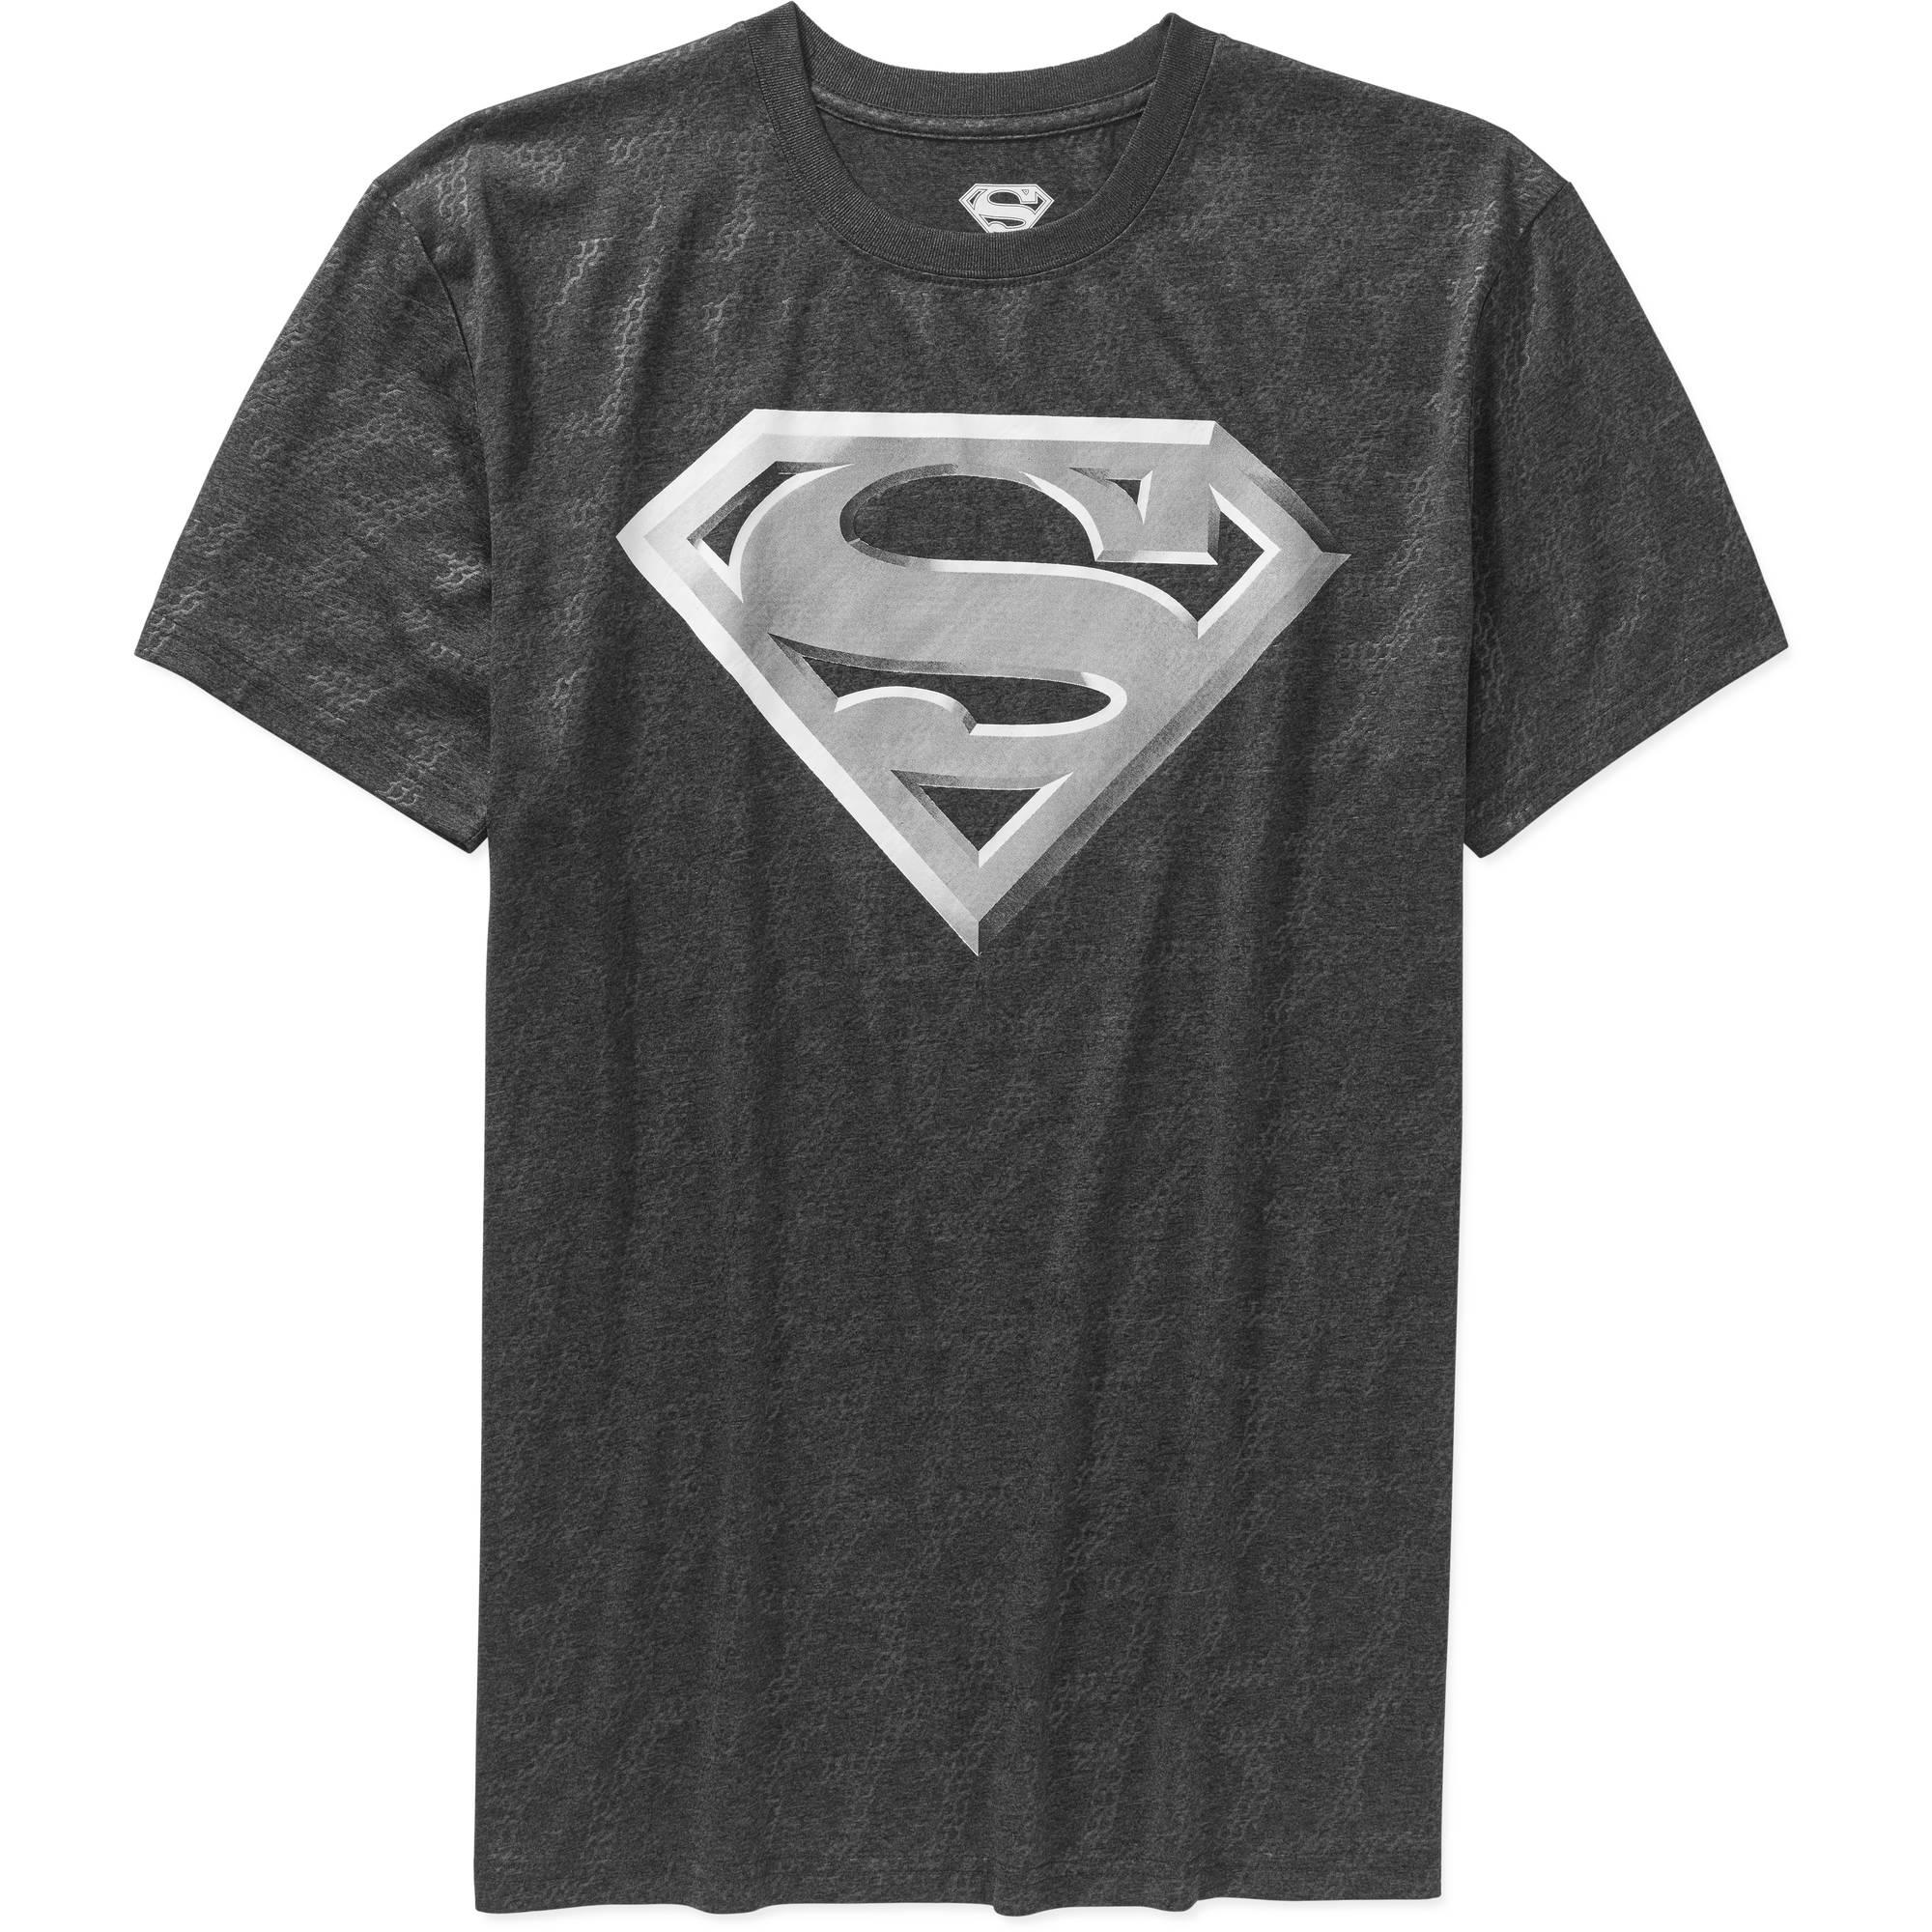 Wallmart Pictures of S Logo - DC Men's Logo Graphic Tee, up to Size 3XL